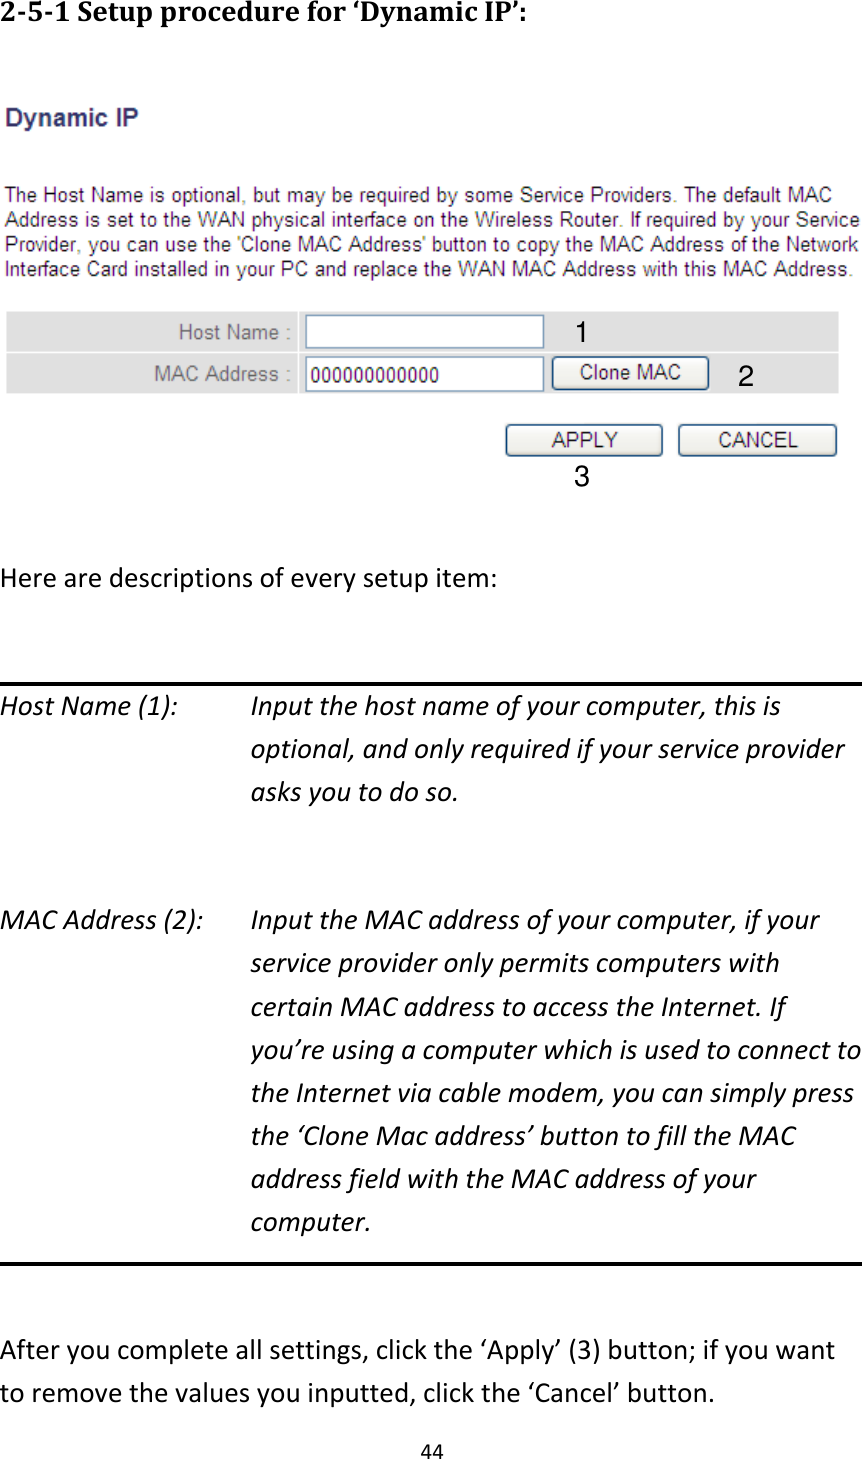 44 2-5-1 Setup procedure for ‘Dynamic IP’:    Here are descriptions of every setup item:  Host Name (1):    Input the host name of your computer, this is optional, and only required if your service provider asks you to do so.    MAC Address (2):    Input the MAC address of your computer, if your service provider only permits computers with certain MAC address to access the Internet. If you’re using a computer which is used to connect to the Internet via cable modem, you can simply press the ‘Clone Mac address’ button to fill the MAC address field with the MAC address of your computer.  After you complete all settings, click the ‘Apply’ (3) button; if you want to remove the values you inputted, click the ‘Cancel’ button. 1 2 3 